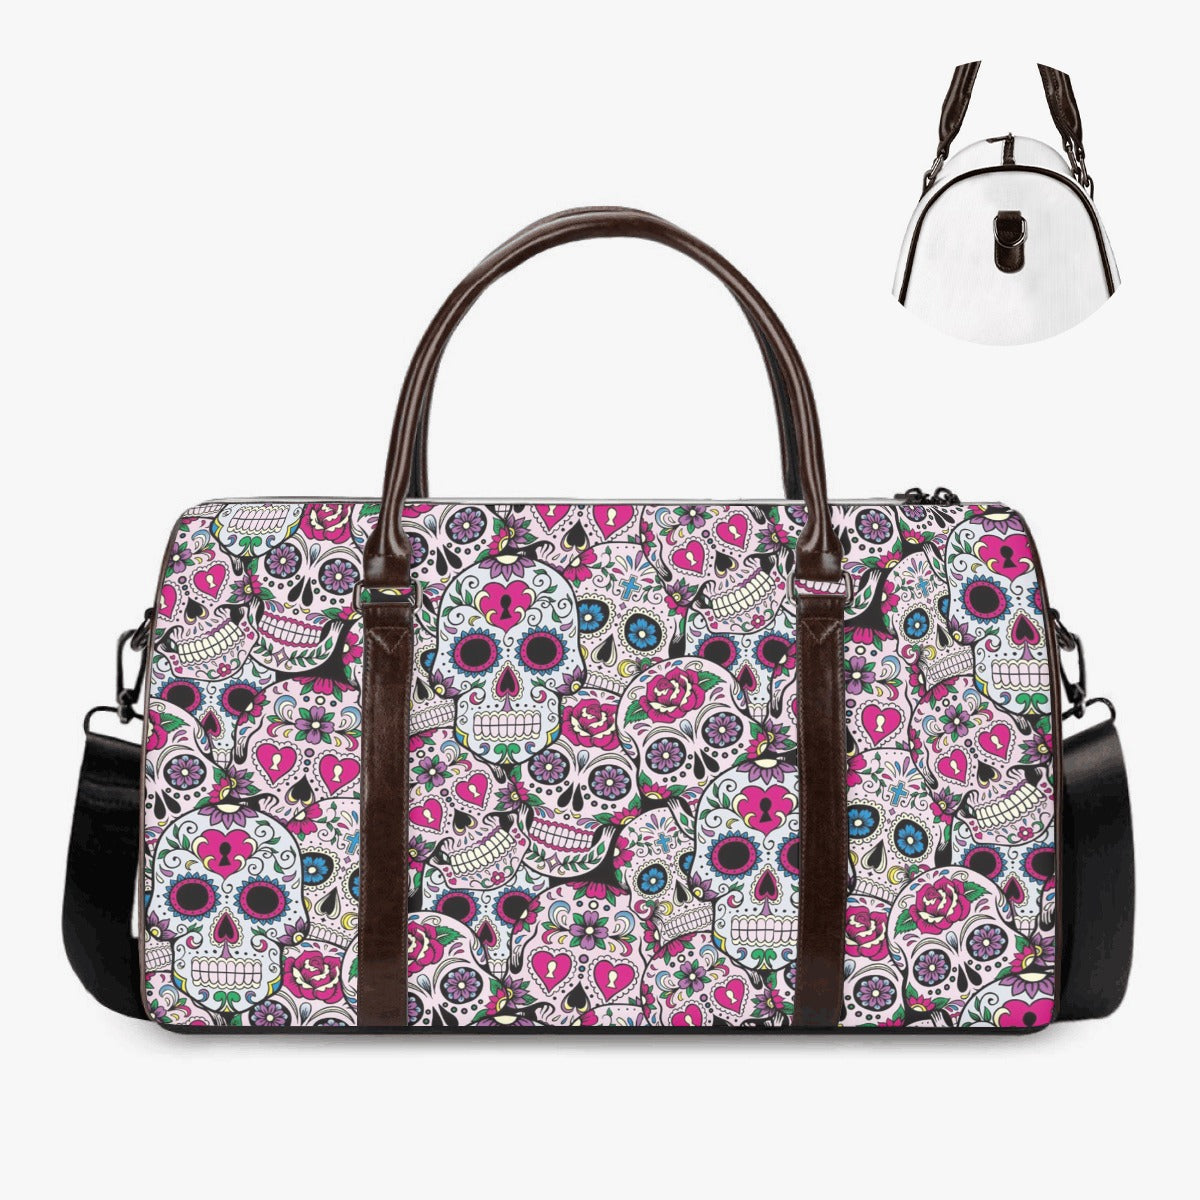 Cinco de mayo skull Canvas Weekend Travel Bag, day of the dead Carry On Bag, floral sugar skull Canvas Weekend Travel Bag, cinco de mayo skull bag